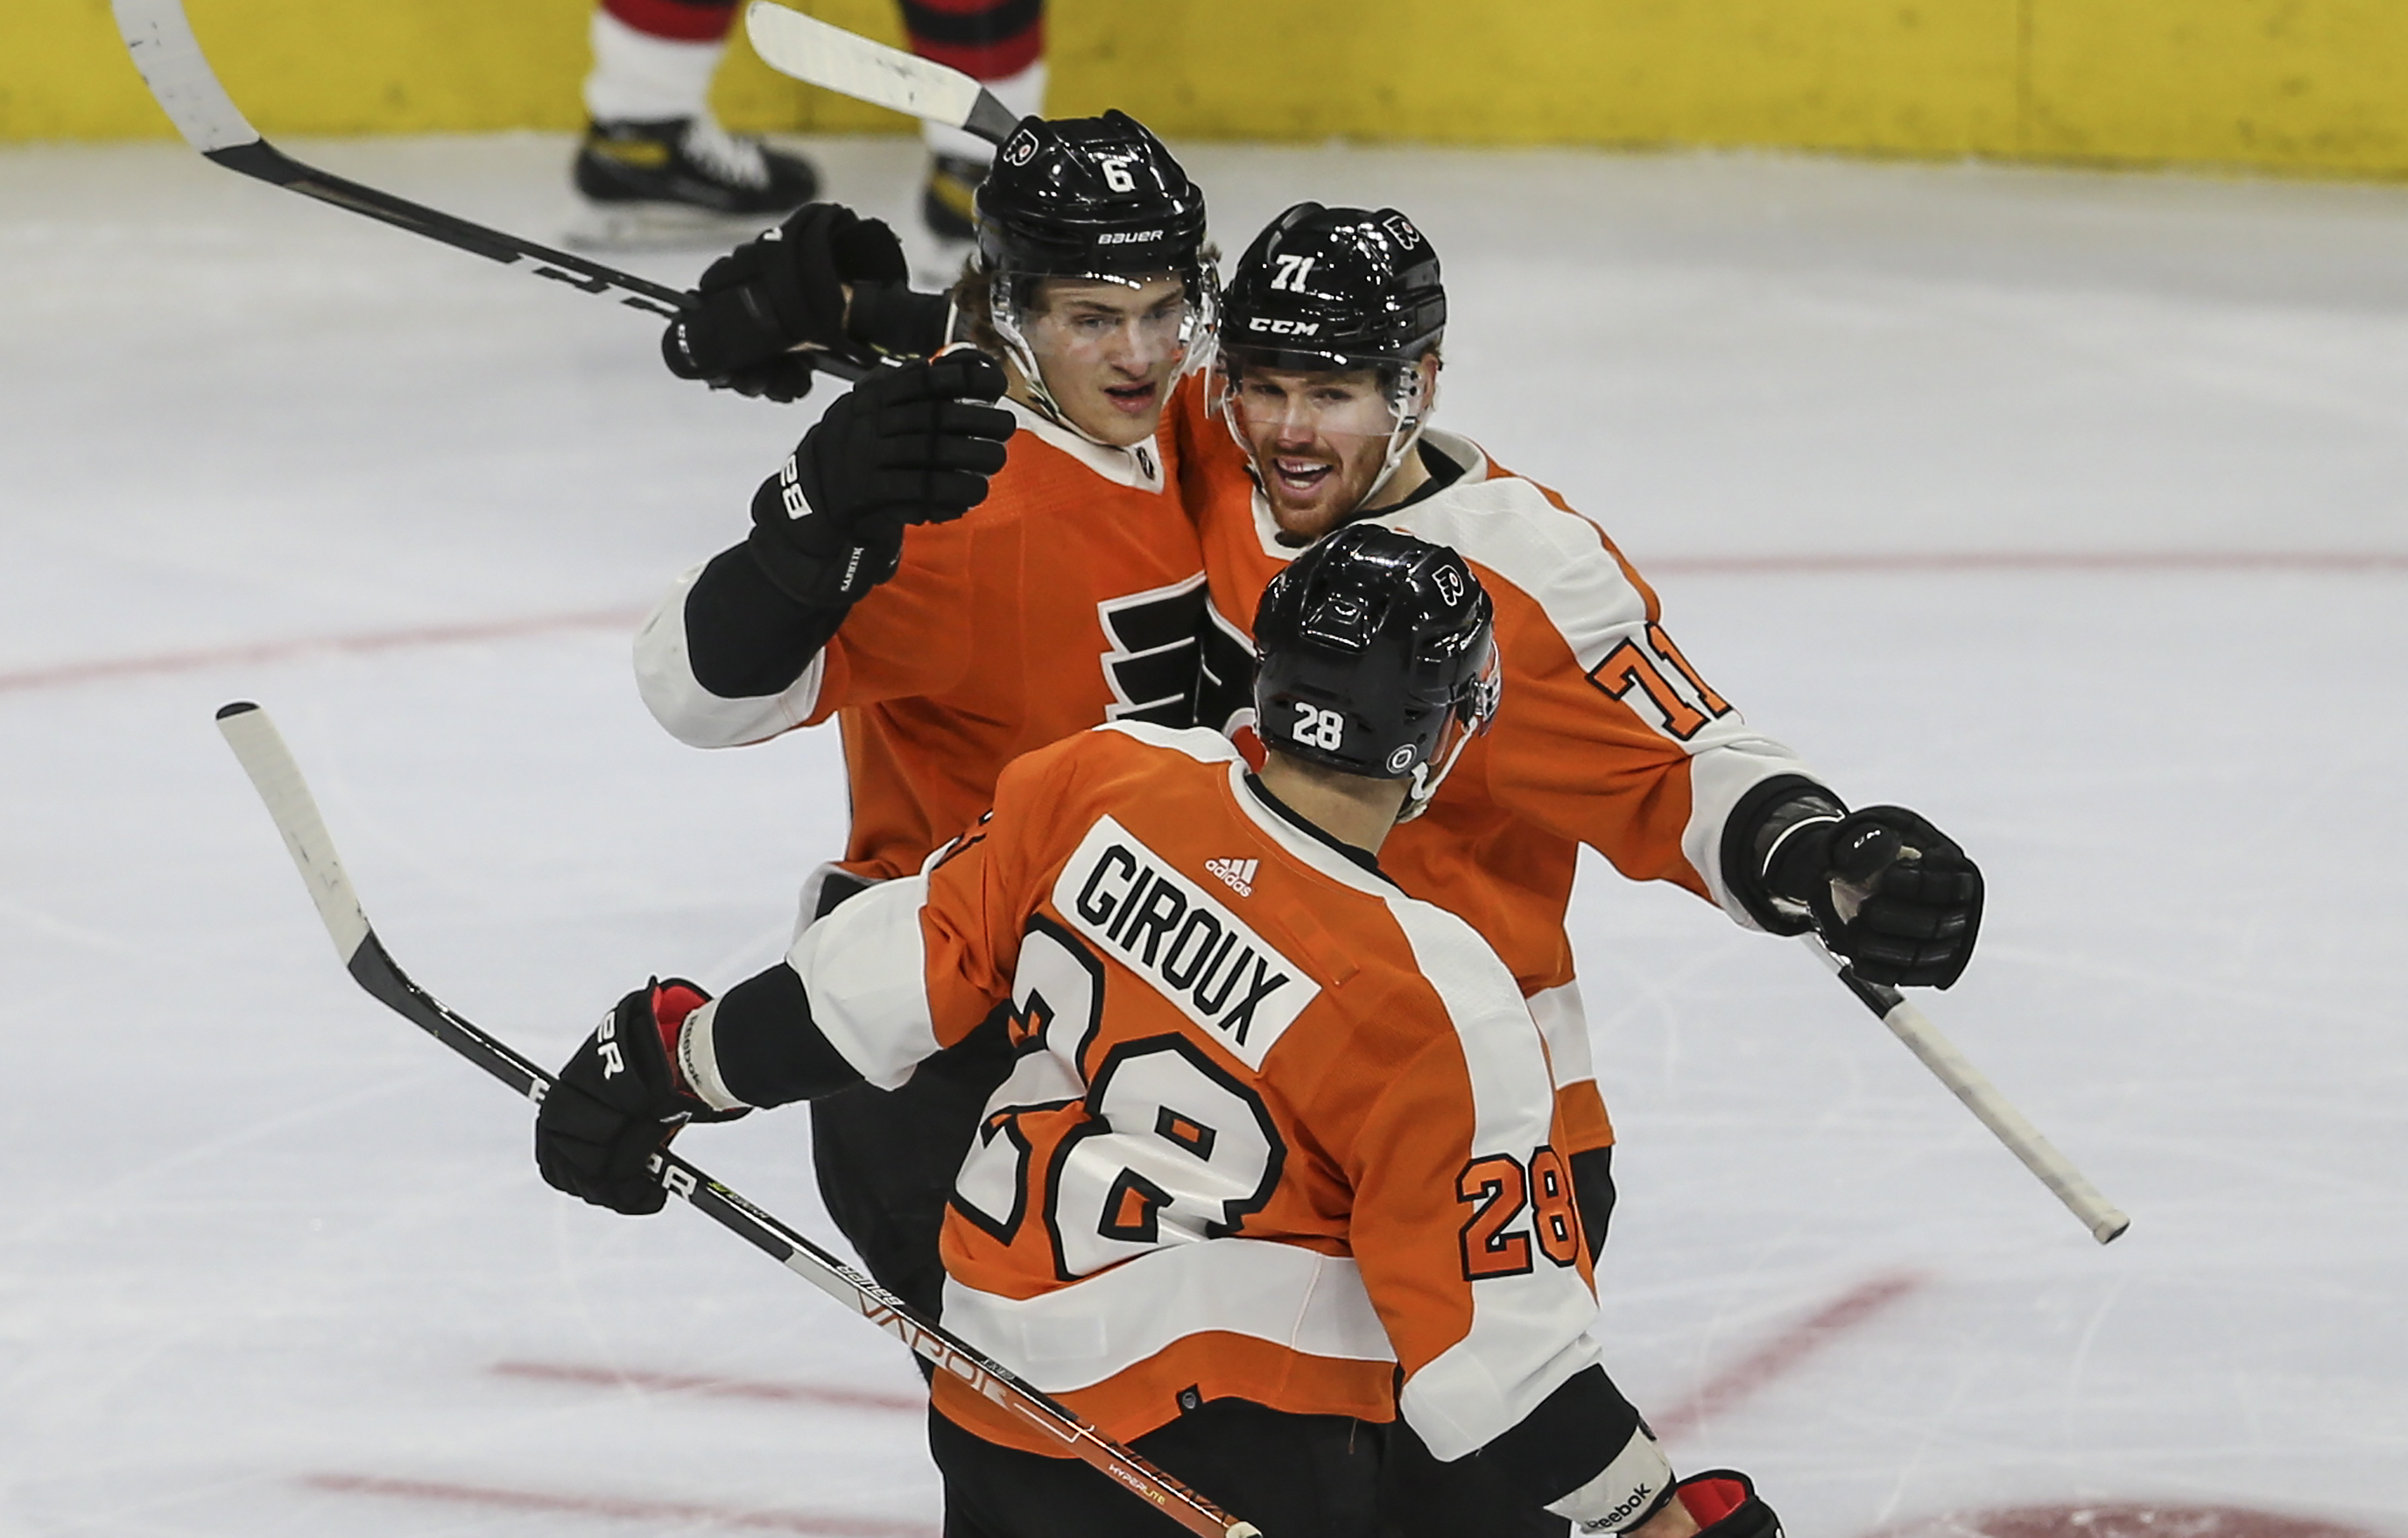 Atkinson's hat trick leads Flyers to 6-1 victory over Devils - The